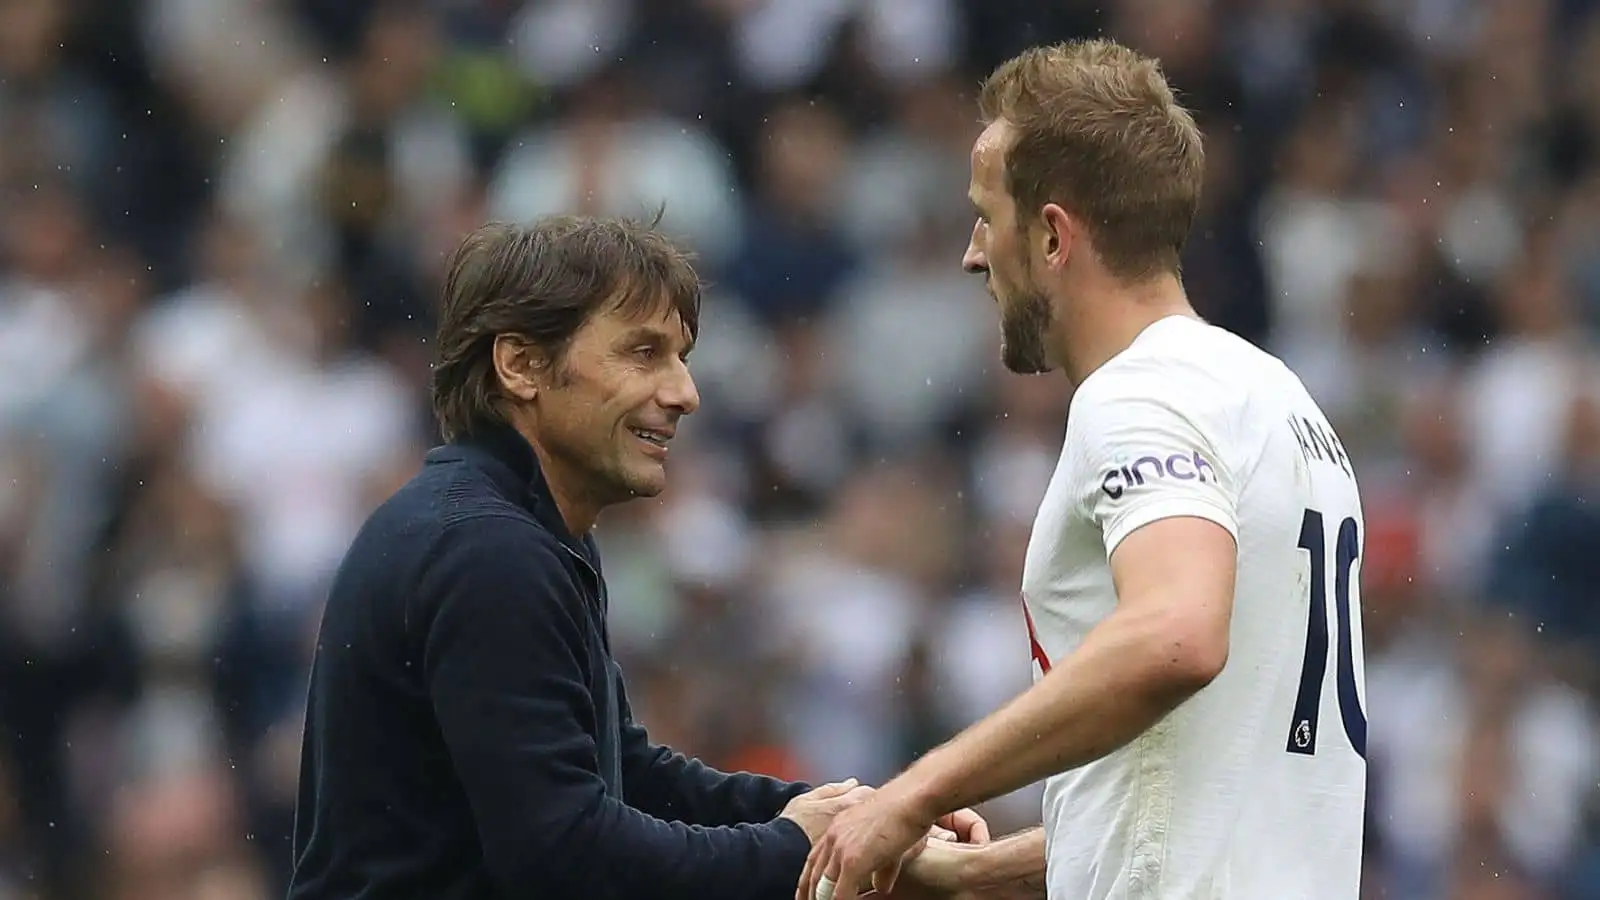 Harry Kane breaks silence on Antonio Conte’s Tottenham exit: ‘That’s who he is and he owns that’